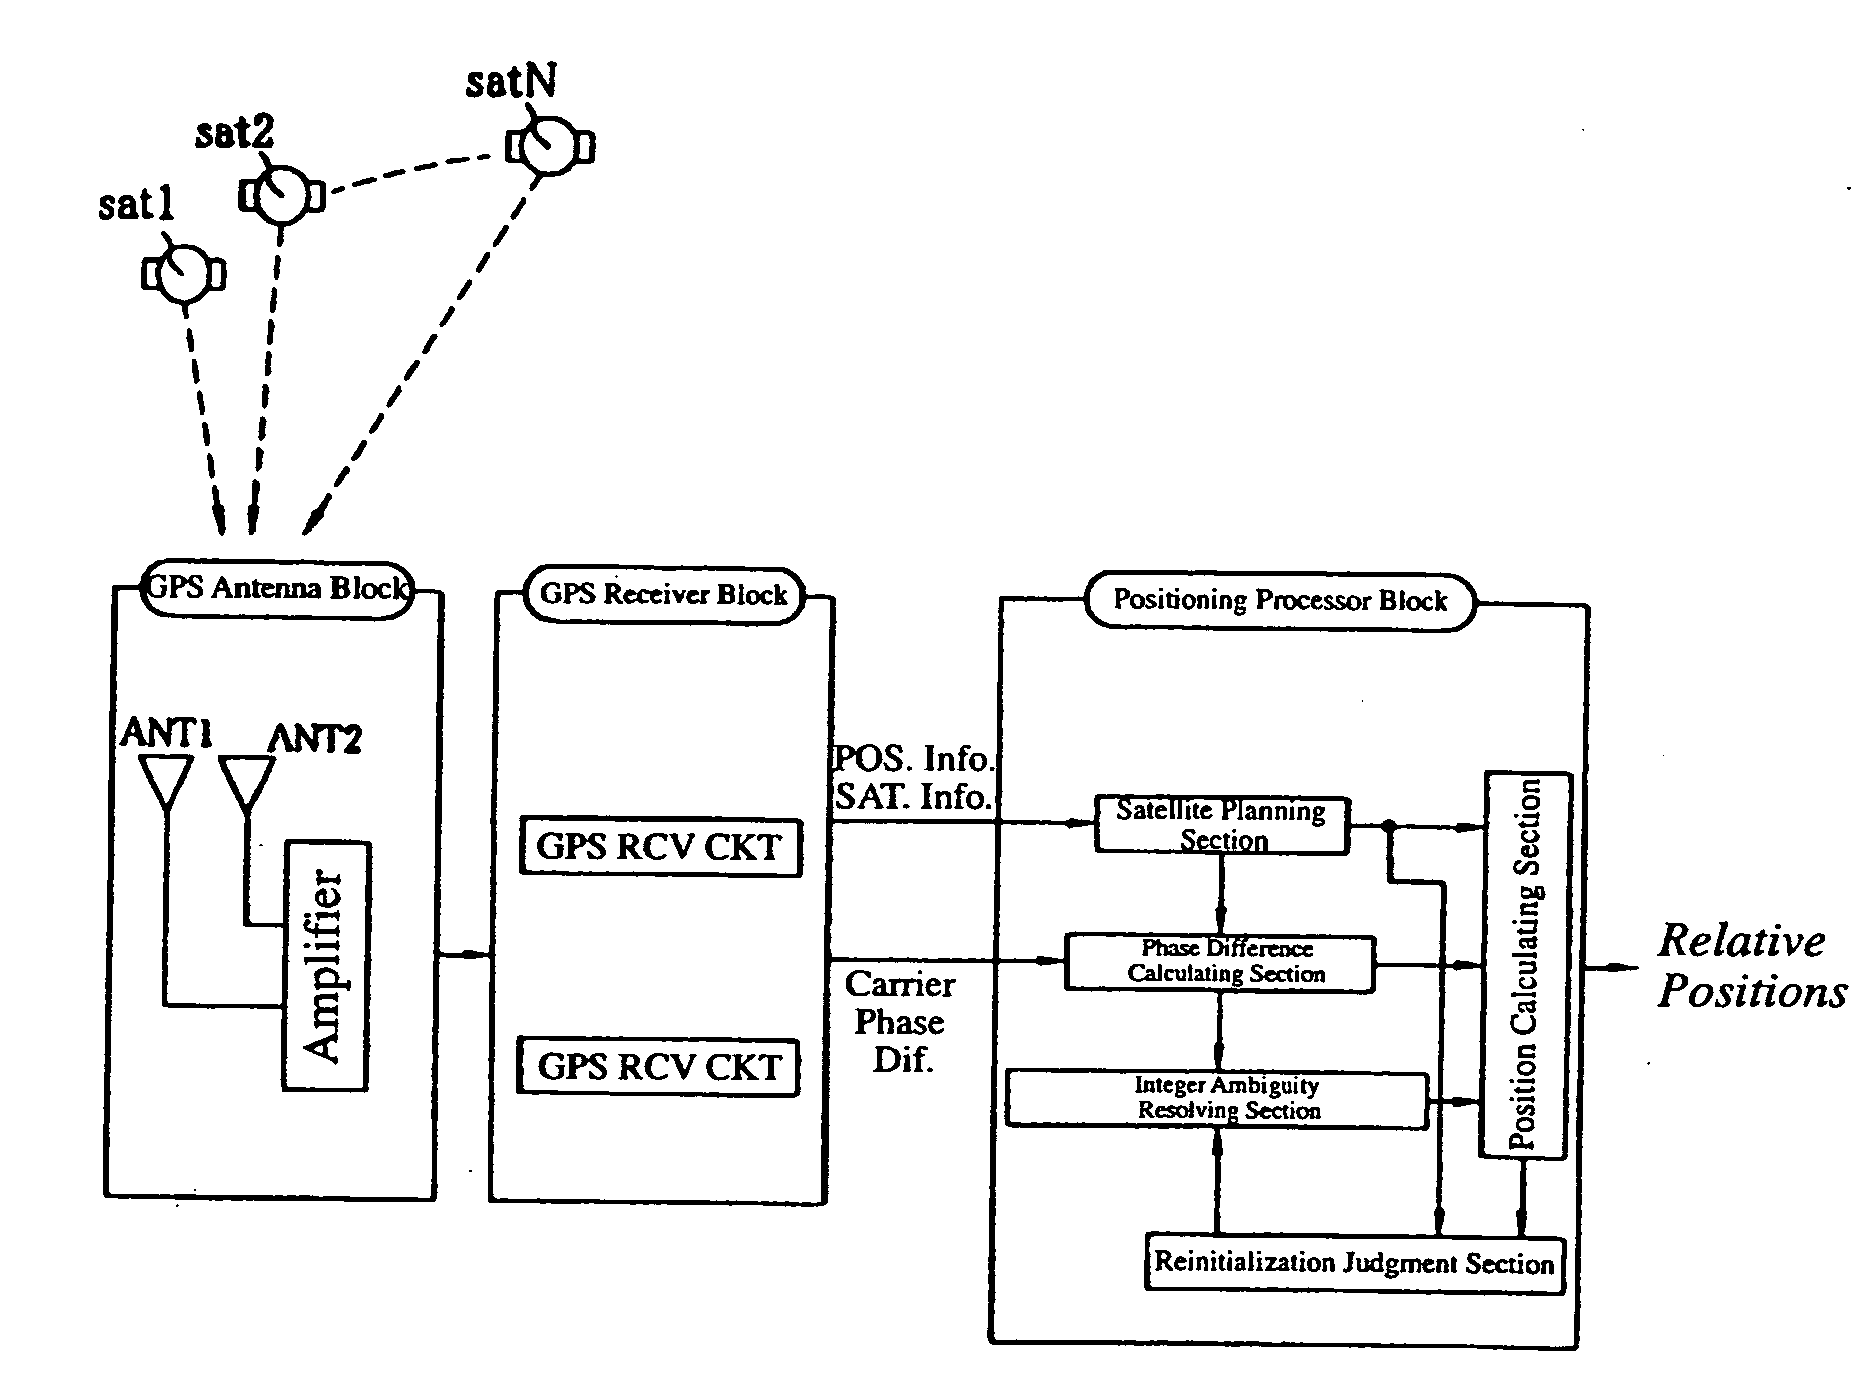 Carrier-phase-based relative positioning device